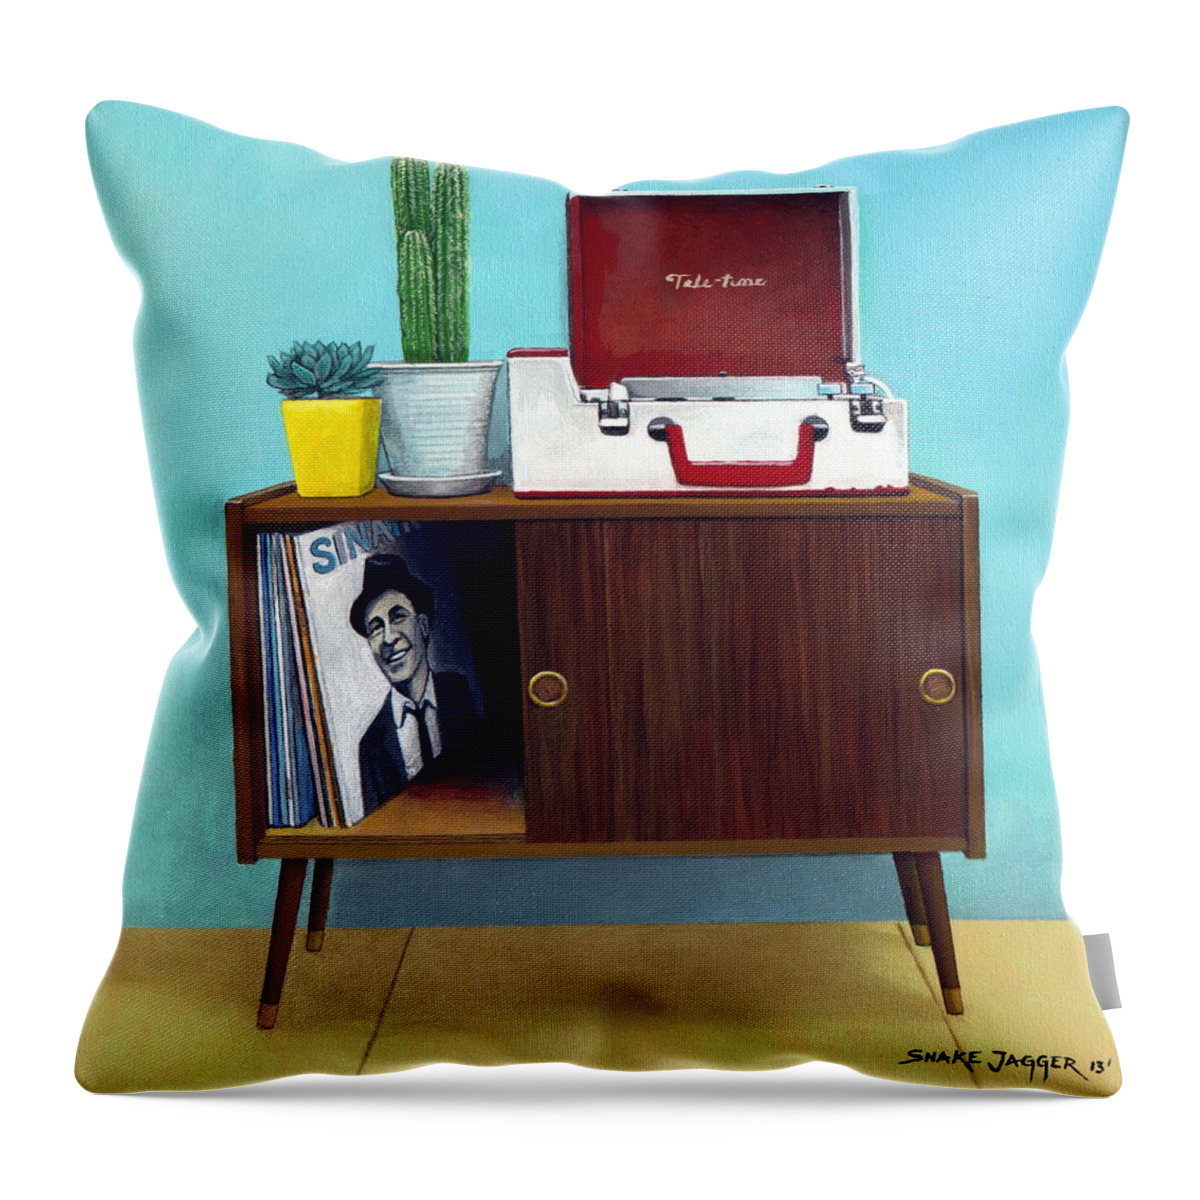 Mid Century Modern Throw Pillow featuring the painting Tele Tune Sinatra by Snake Jagger